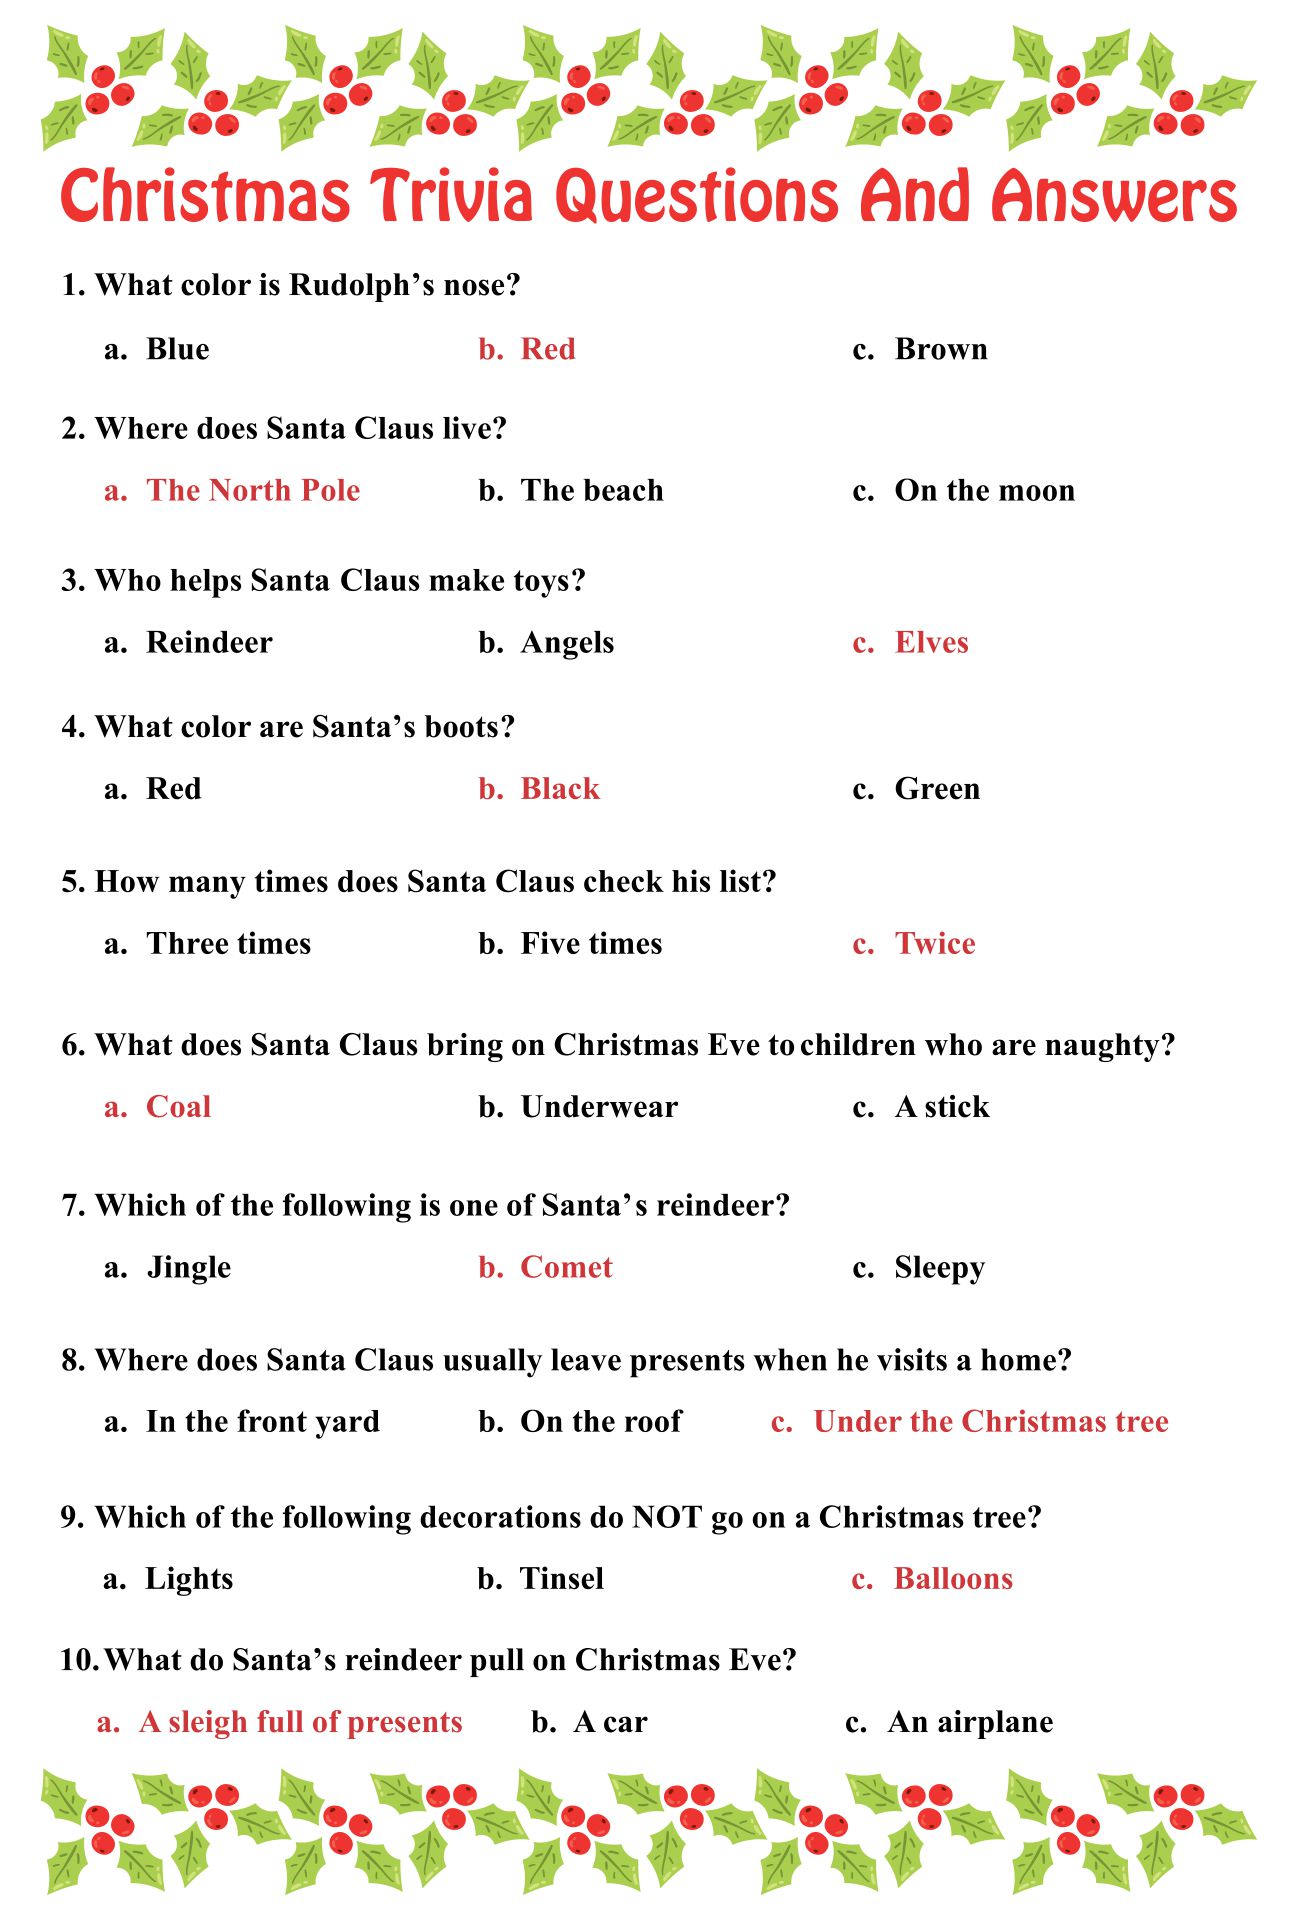 holiday-movie-trivia-questions-and-answers-printables-amanda-said-this